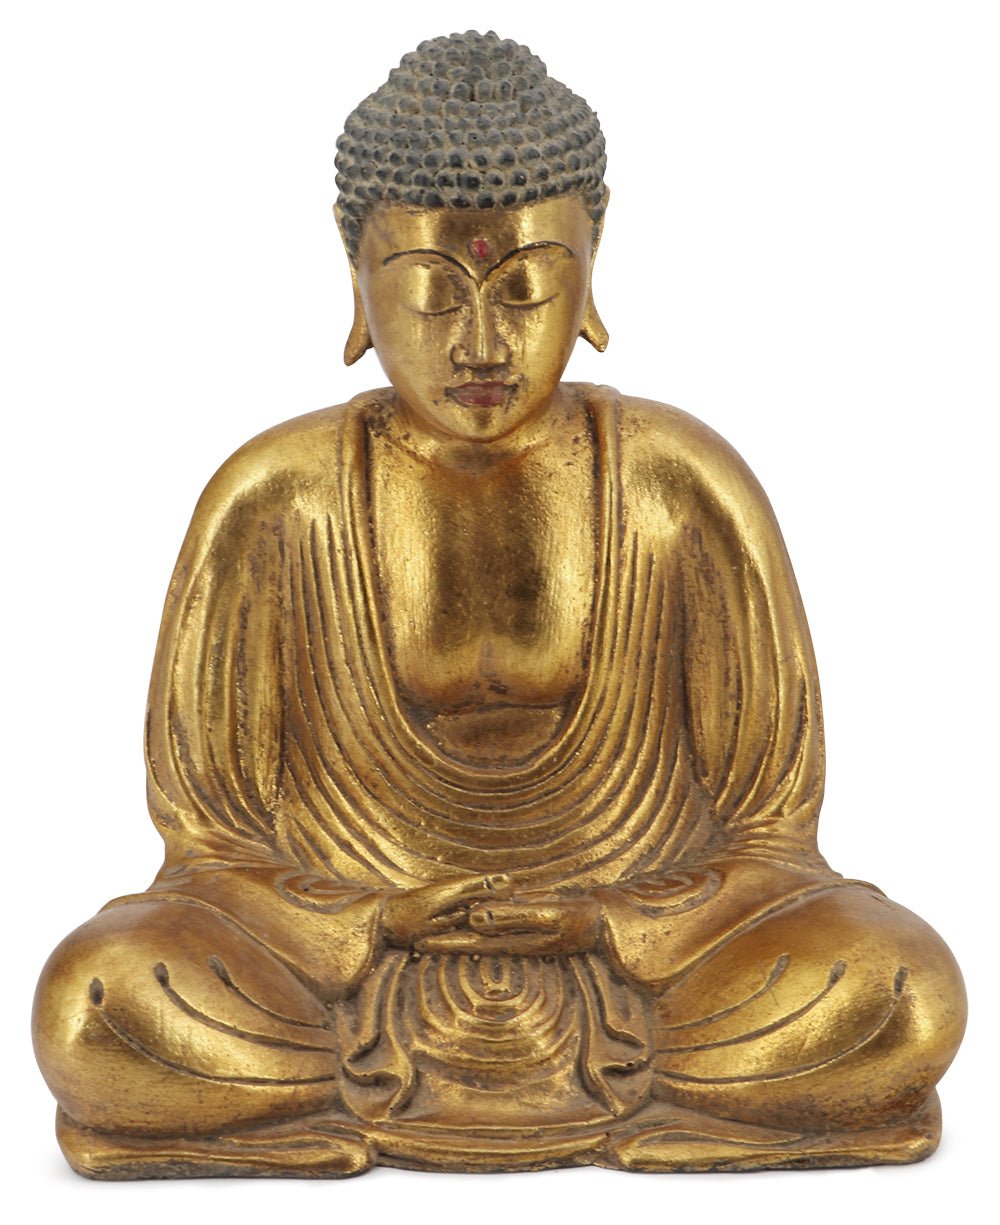 Meditating Buddha Statue in Antique Gold Finish, 8 Inches High - Sculptures & Statues